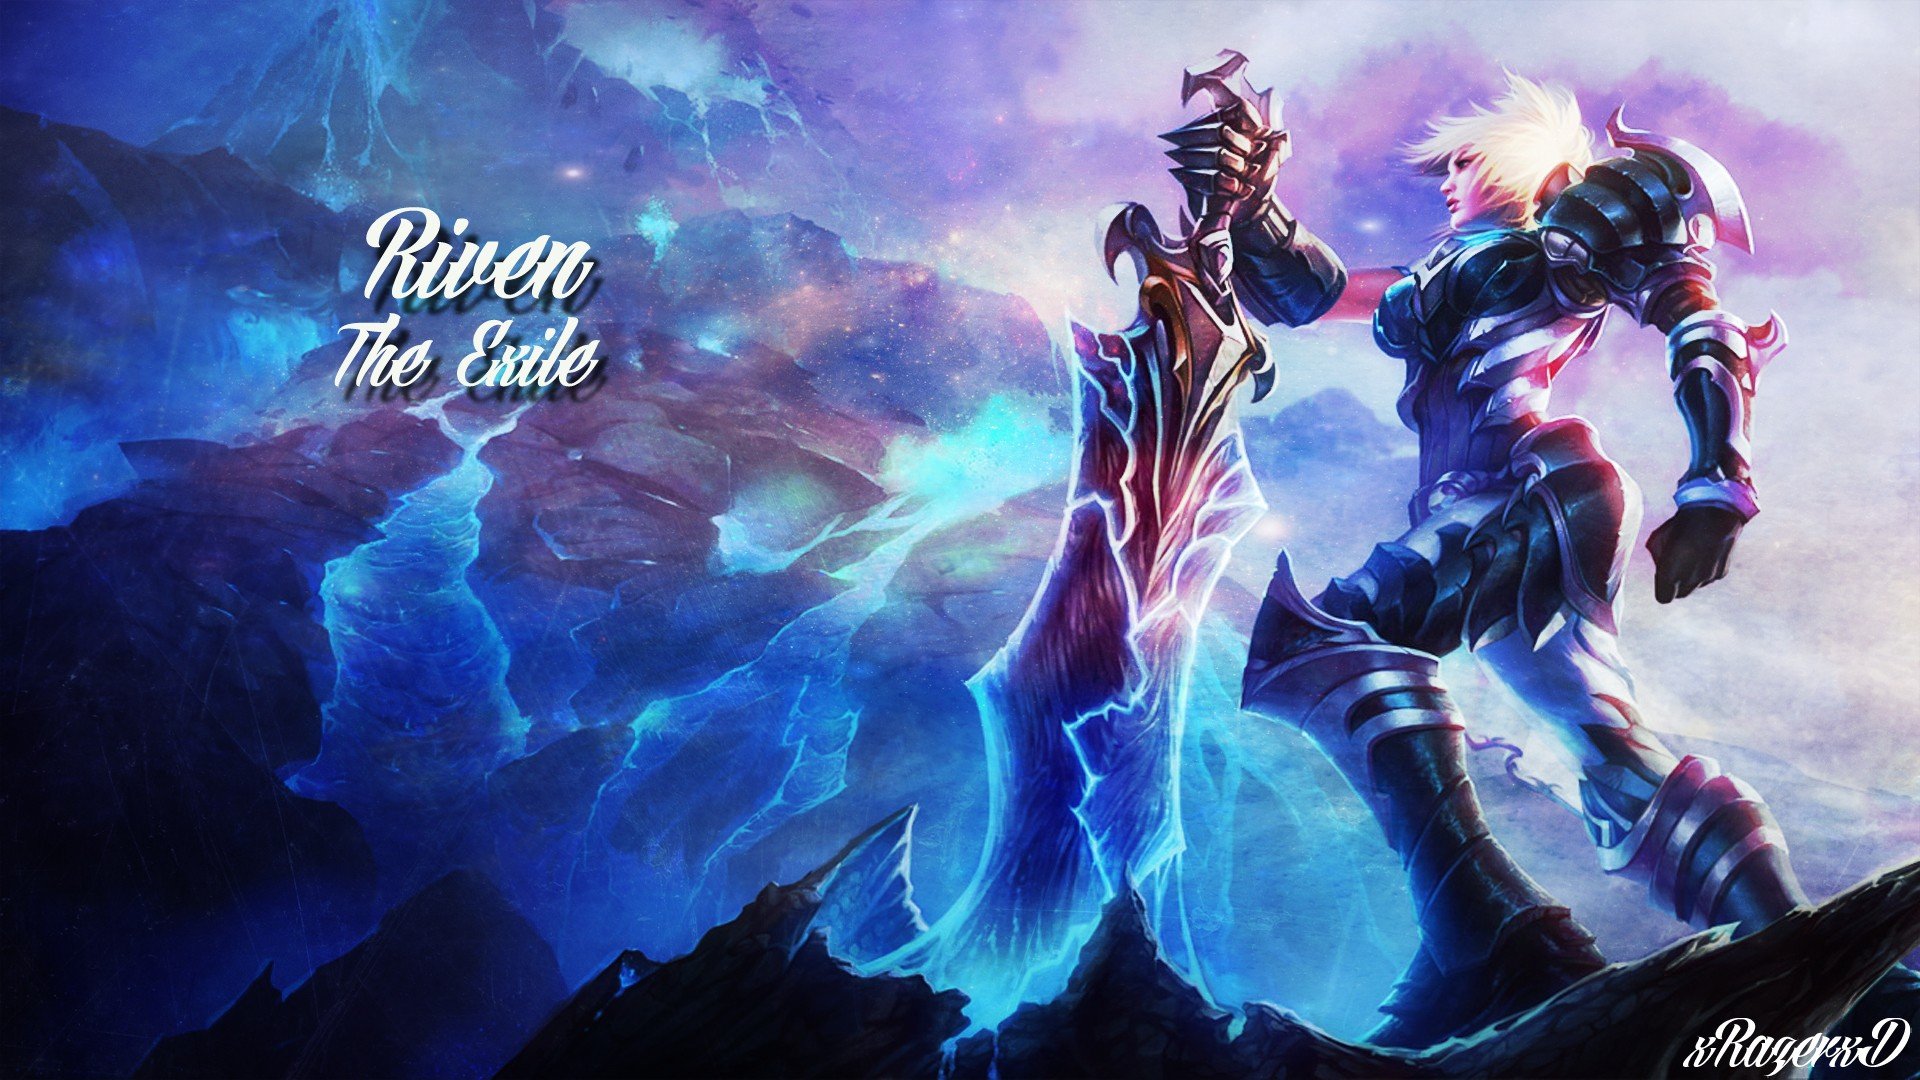 League Of Legends Full HD Wallpaper and Background Image | 1920x1080 ...